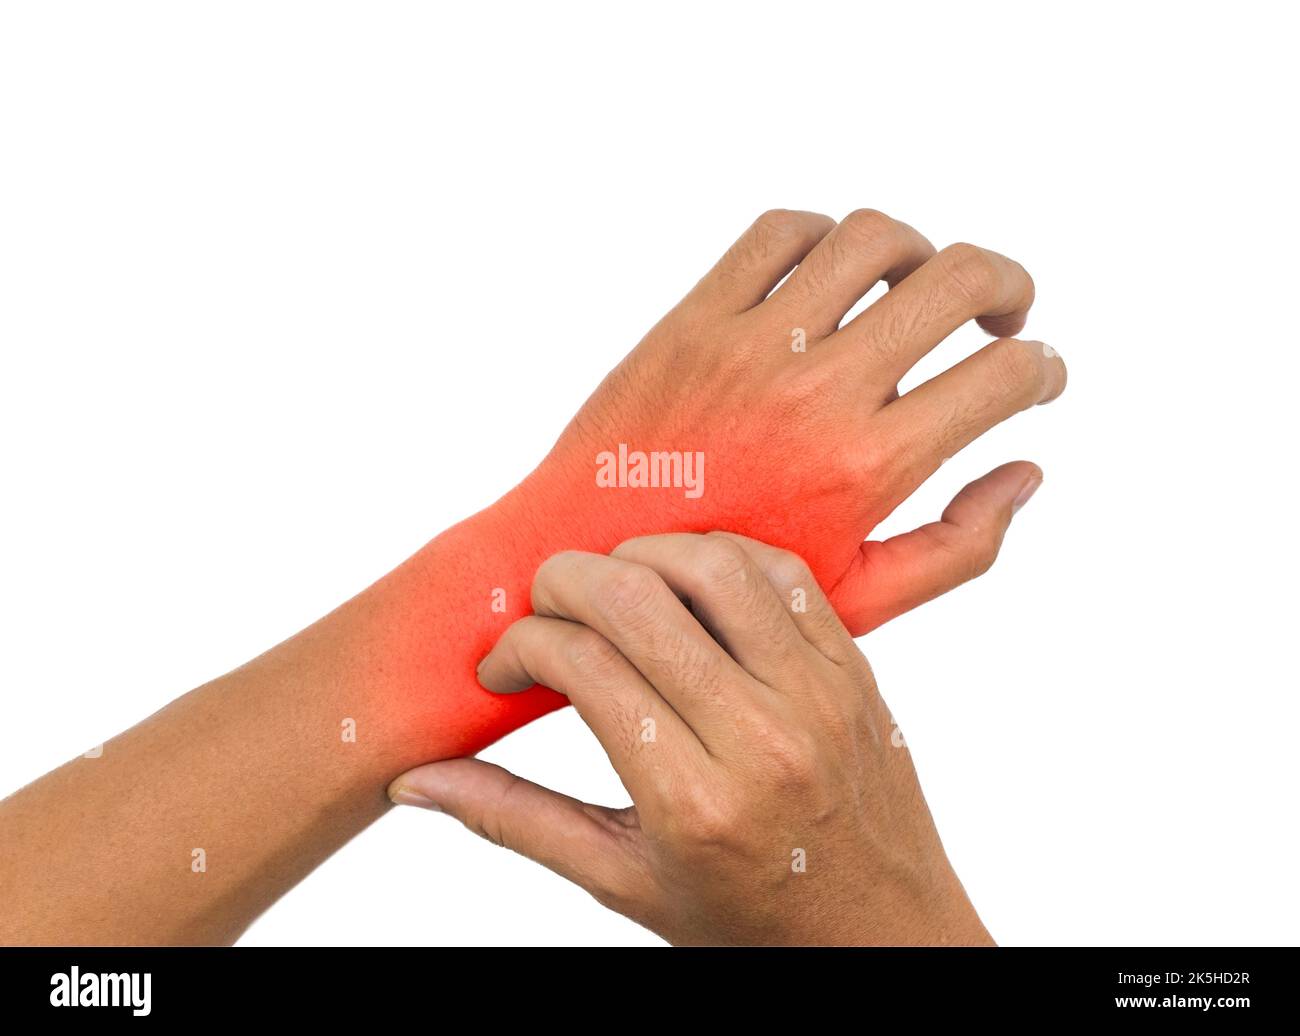 Asian young man scratching his hand. Concept of itchy skin diseases such as scabies, fungal infection, eczema, psoriasis, allergy, etc. Stock Photo